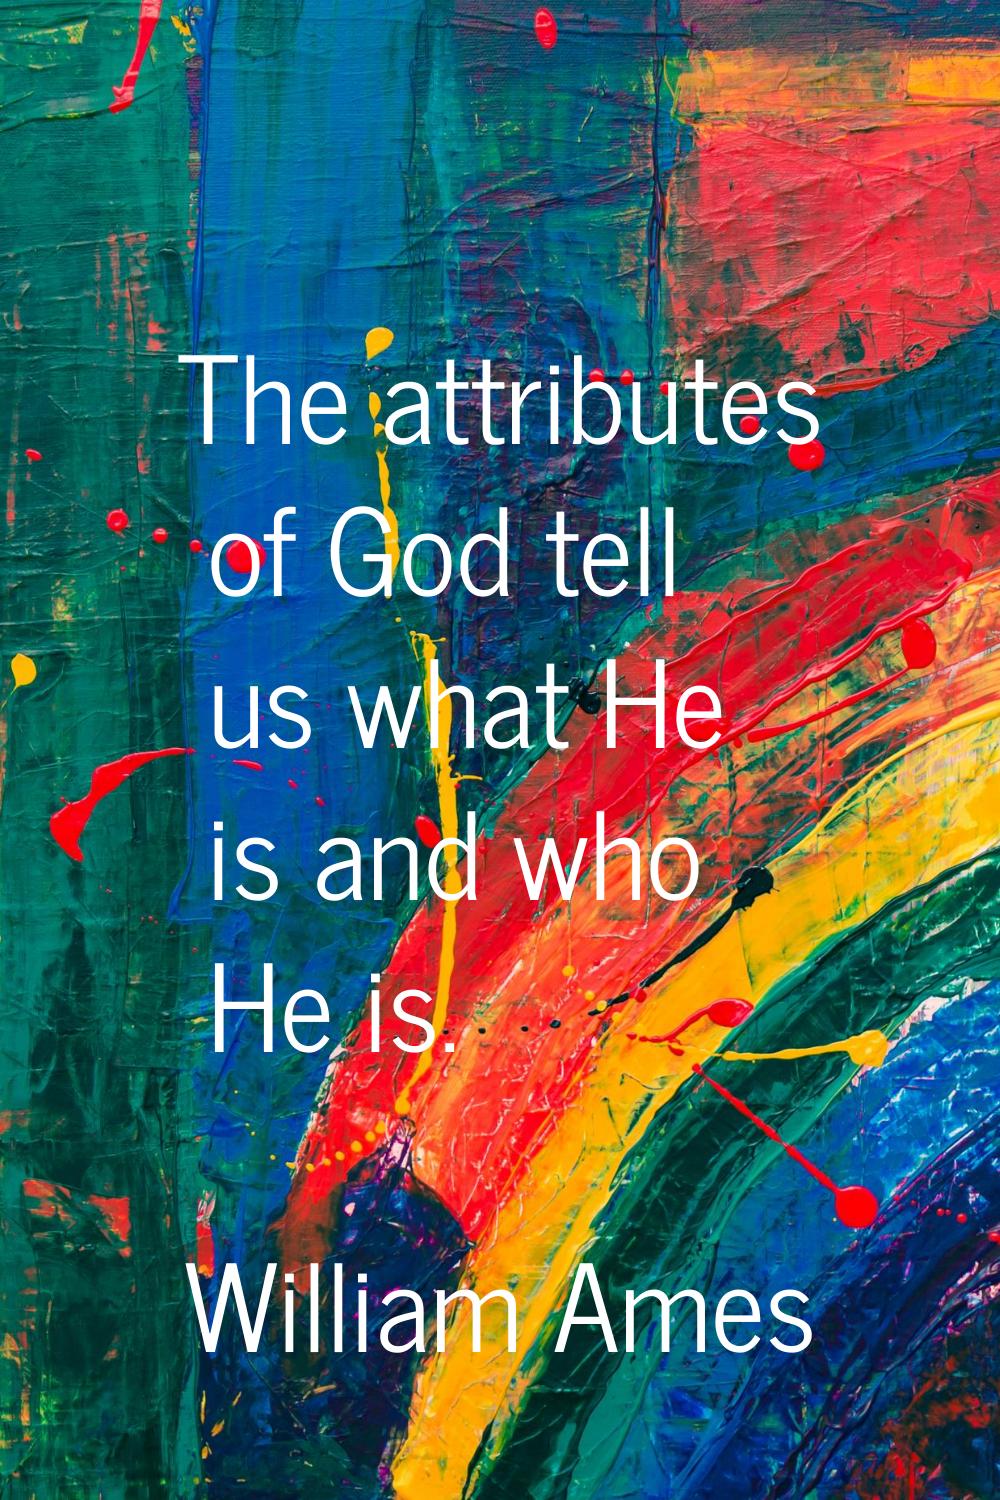 The attributes of God tell us what He is and who He is.